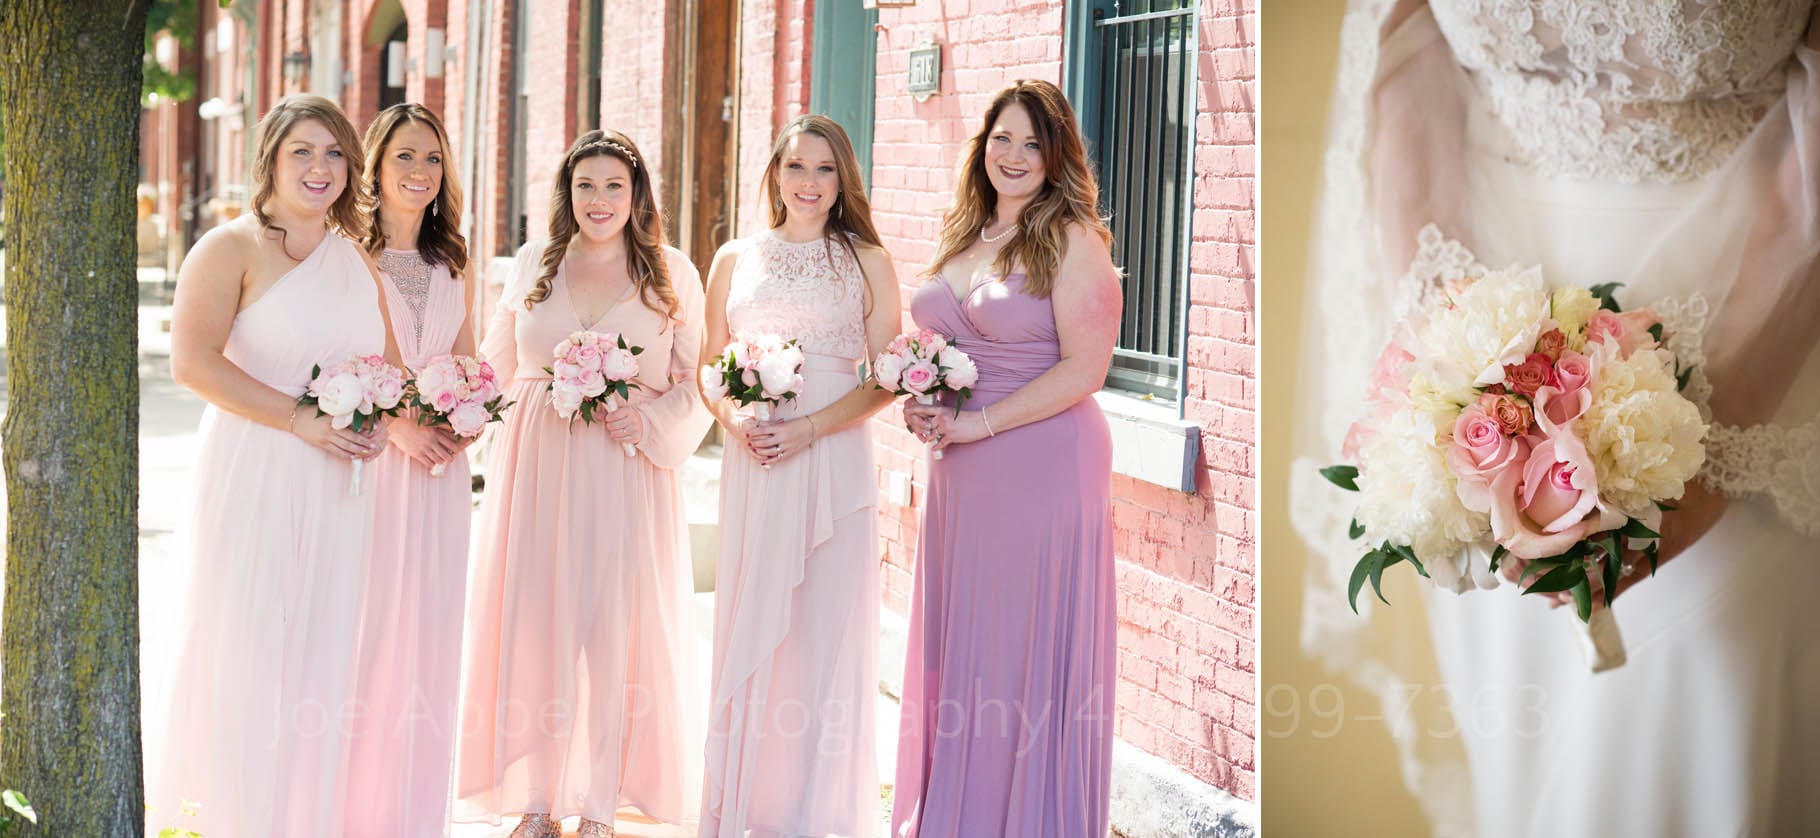 Bridesmaids in pink and purple hues stand on a sunlit street with similarly colored pastel-shaded buildings behind them. Second photo is a closeup of the bride holding a bouquet of pink and purple flowers.